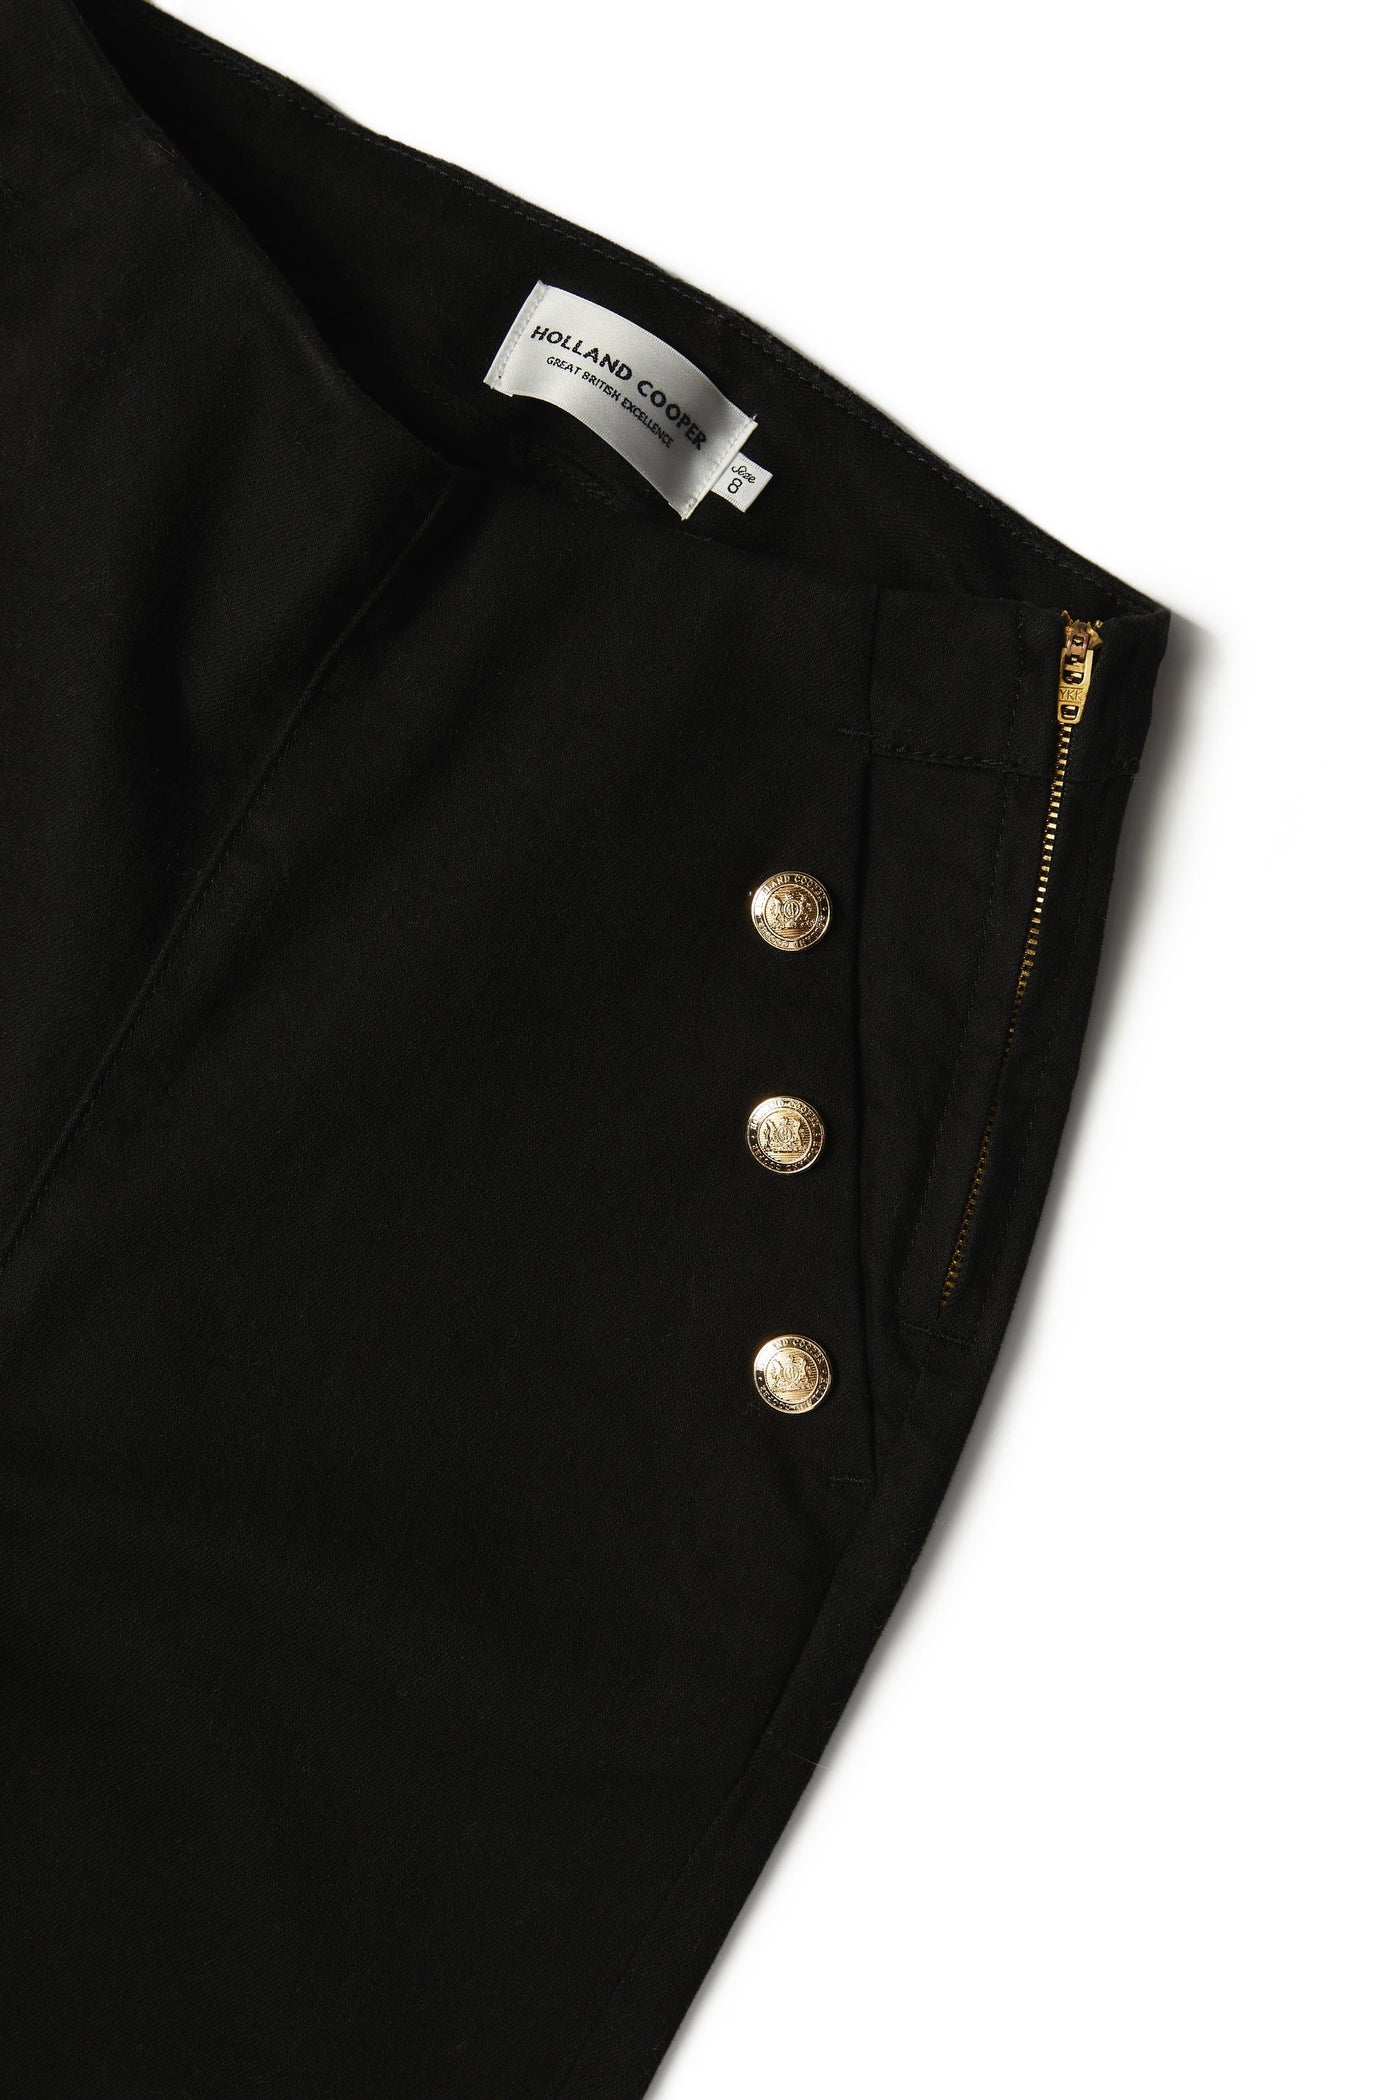 Holland Cooper Amoria Flared Jean in Black Detail